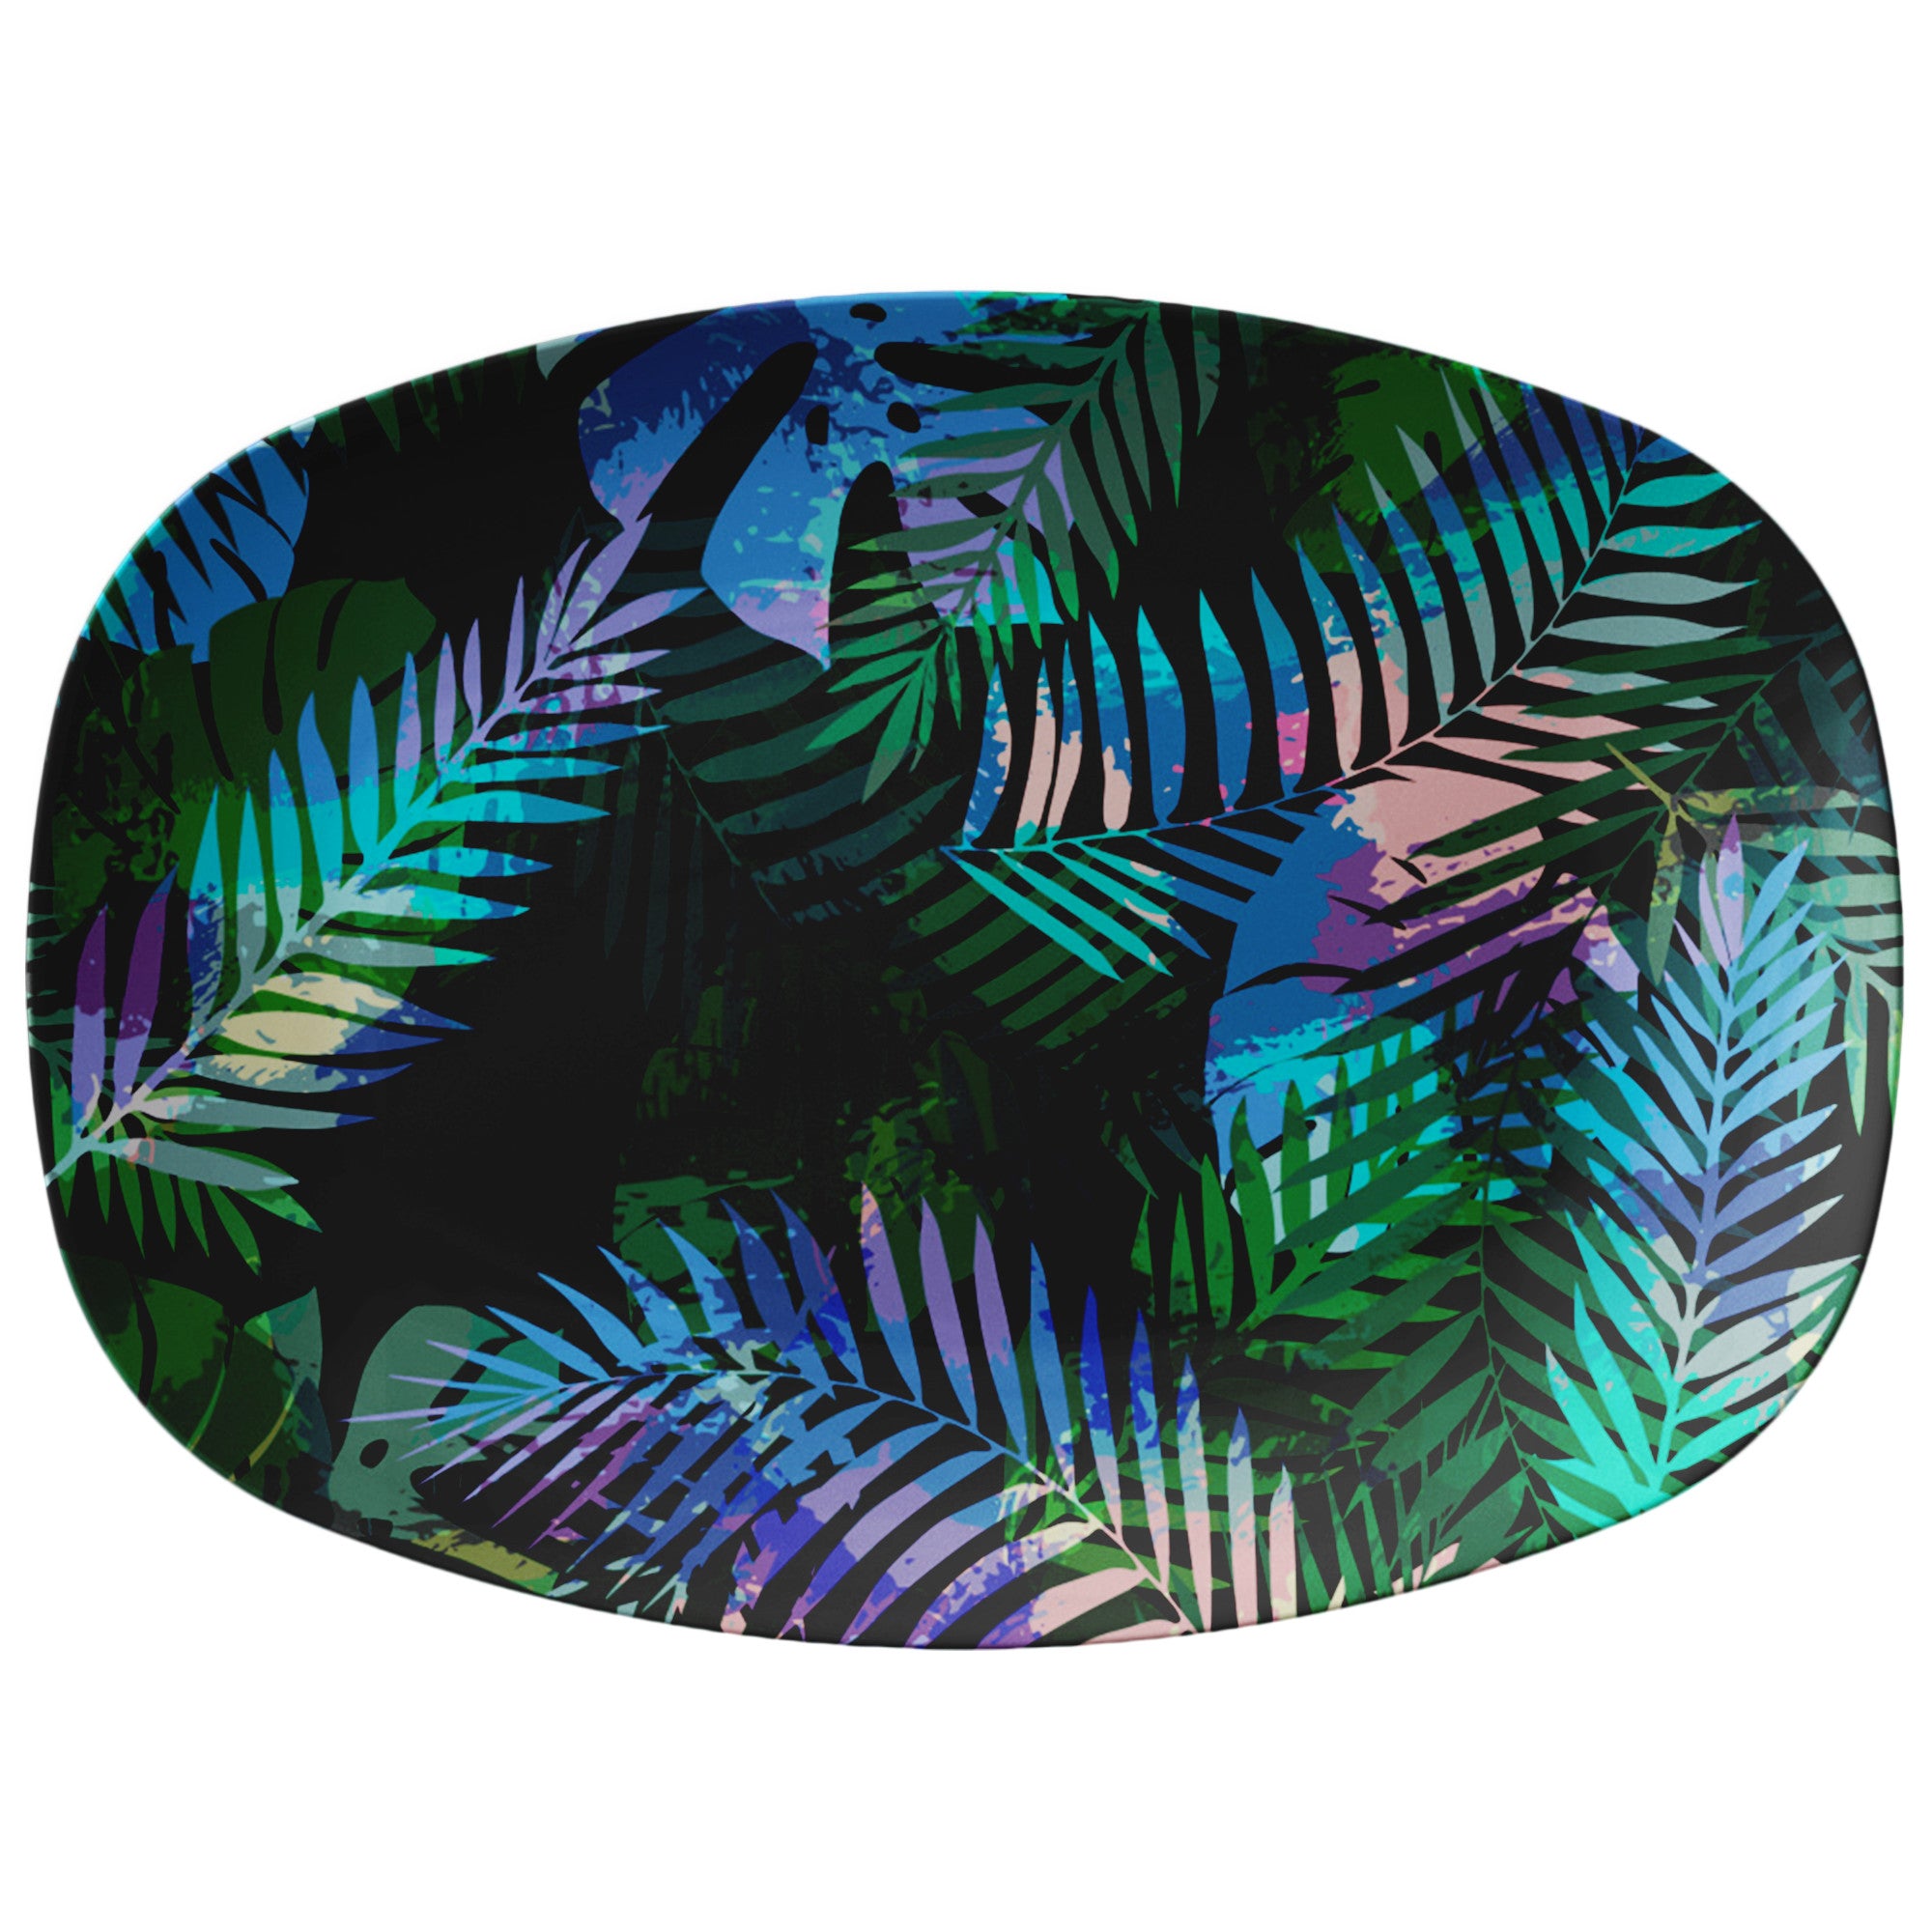 Printed Polymer Serving Platter - Tropical Print in Peacock